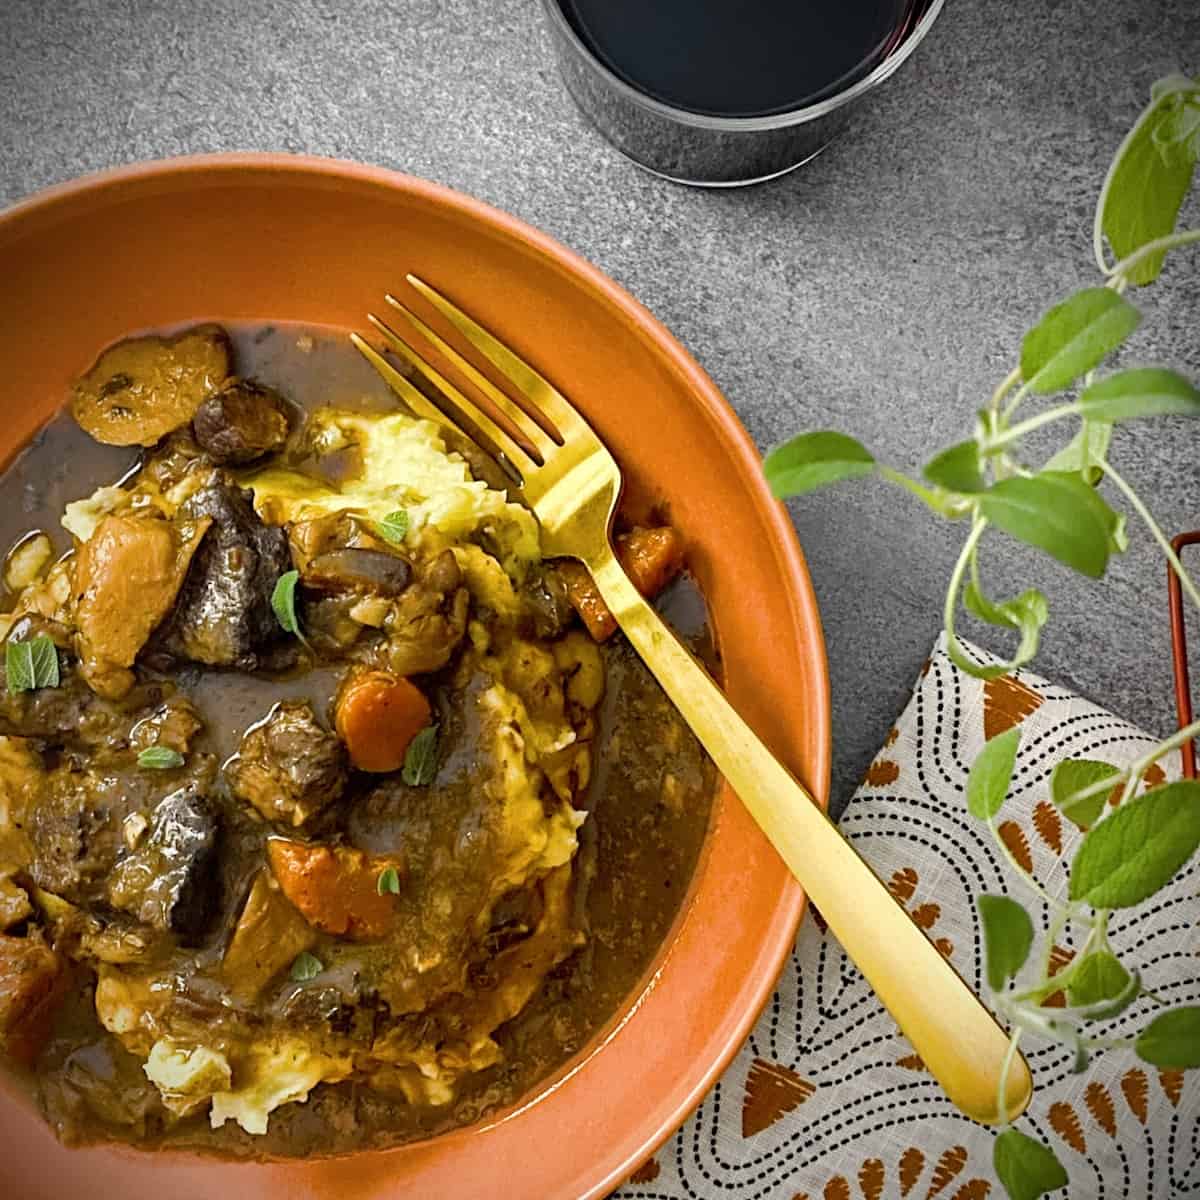 https://confessionsofagroceryaddict.com/wp-content/uploads/2021/01/instant-pot-beef-stew-with-bacon-square-hero.jpeg